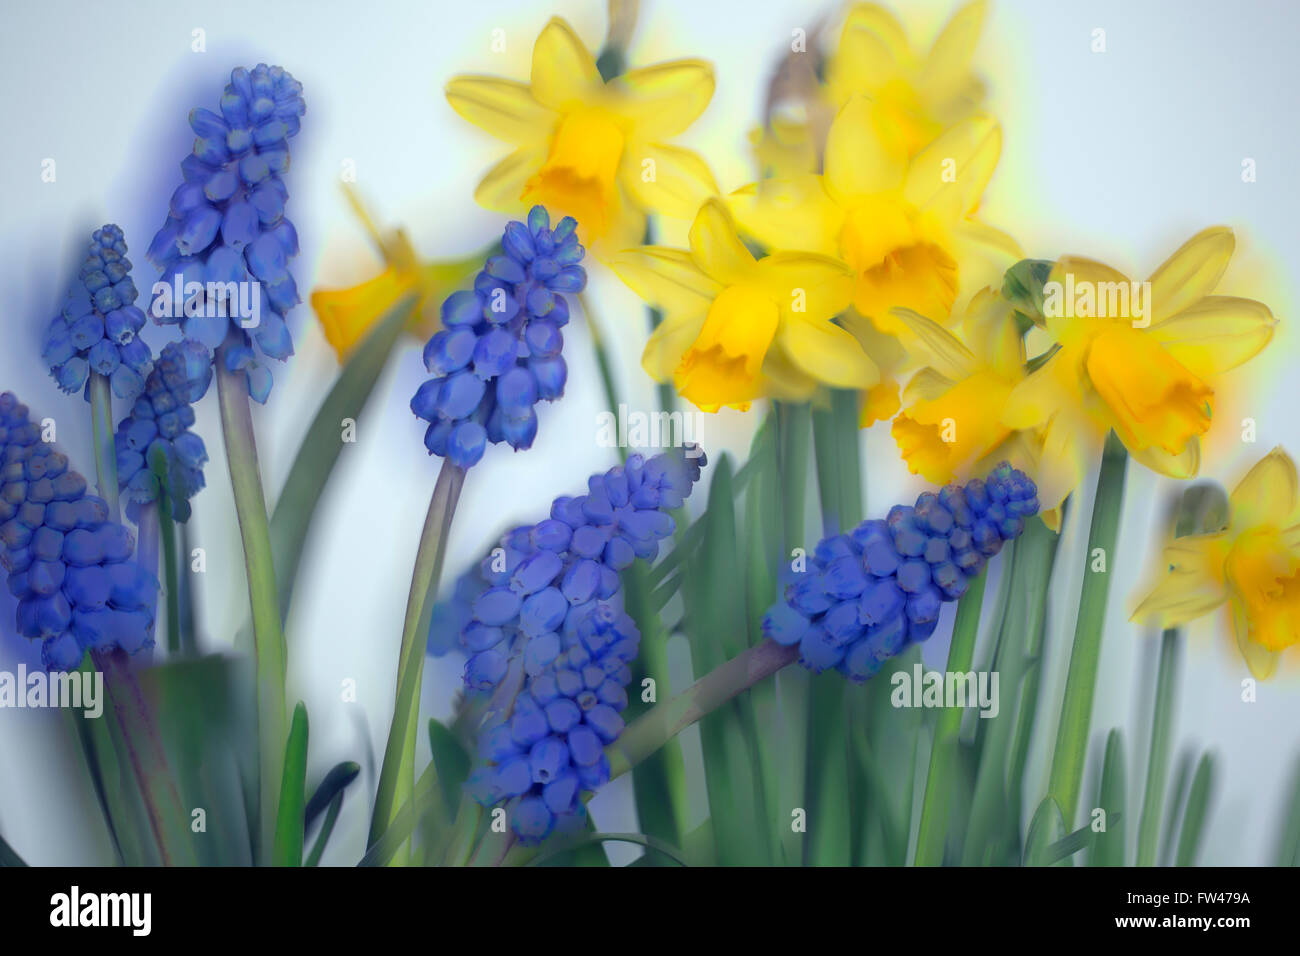 Daffodils and Grape Hyacinths  in flower photographed using soft focus technique Stock Photo